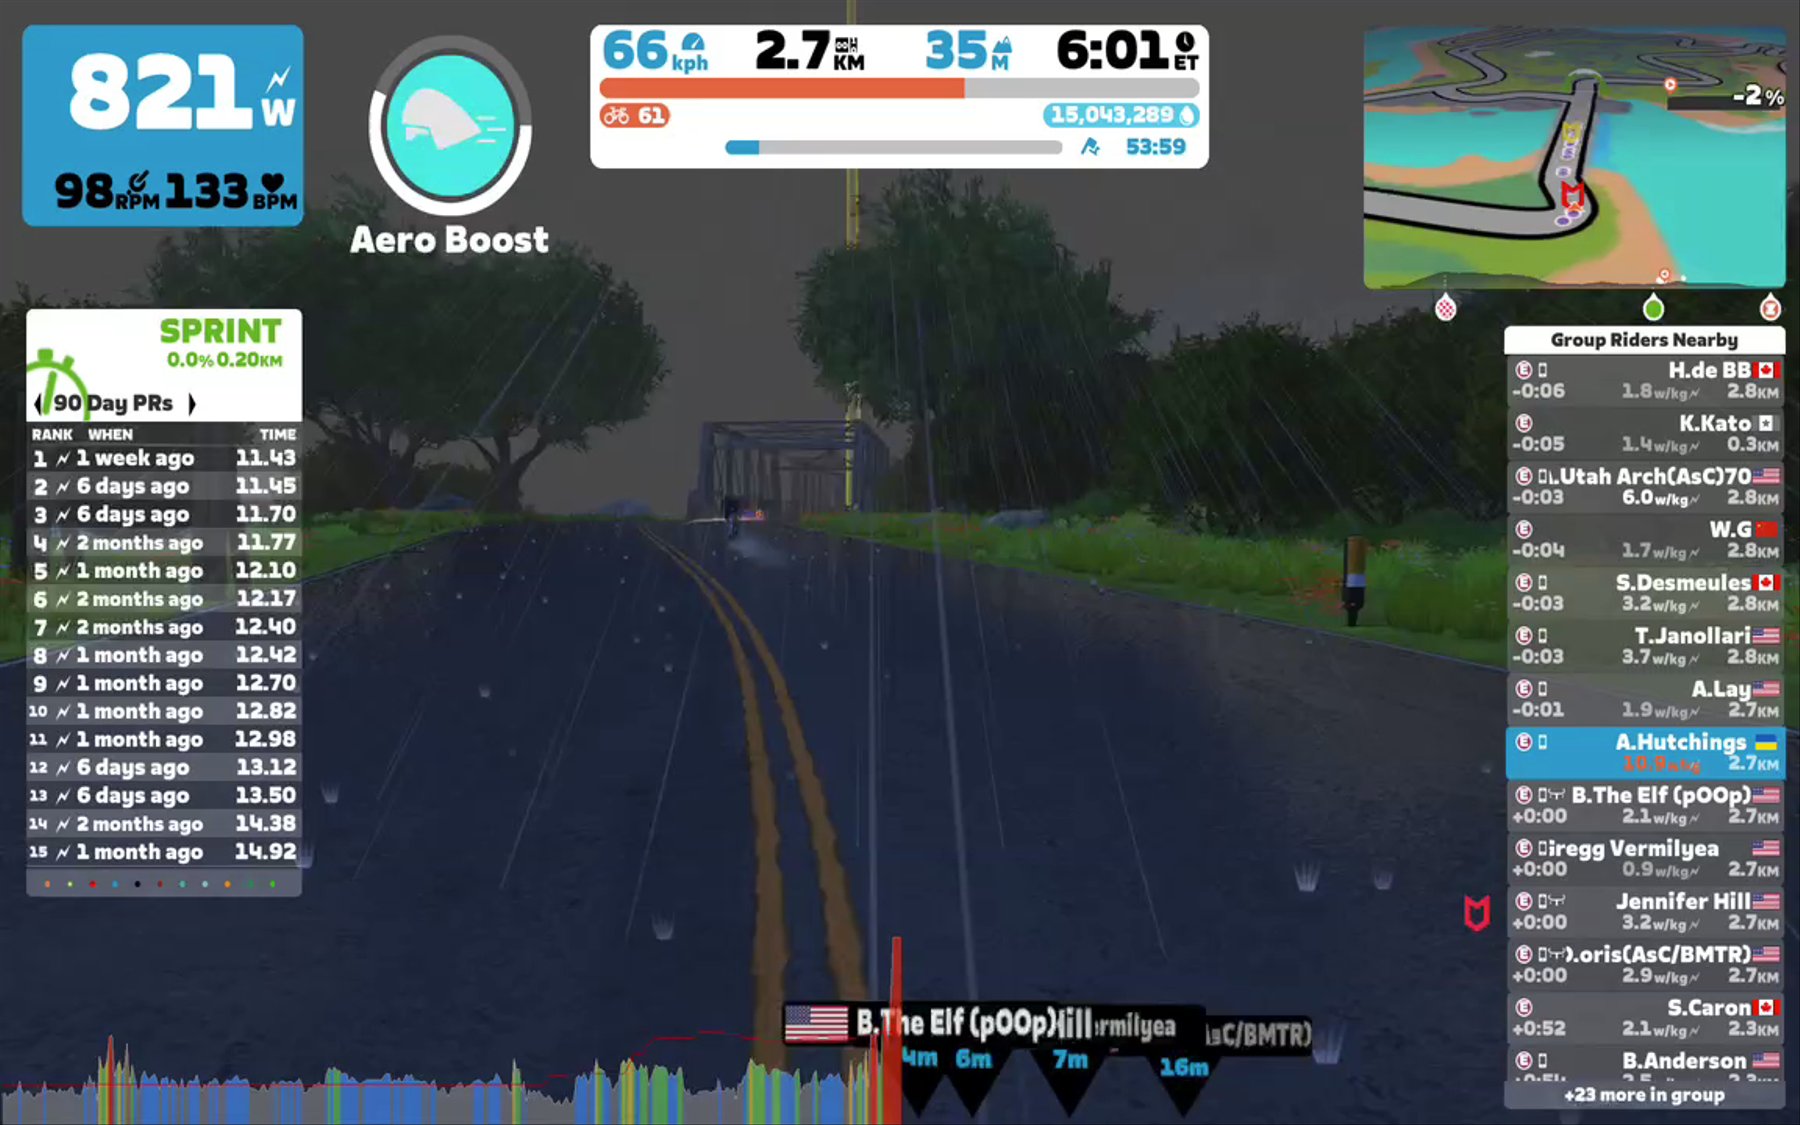 Zwift - Group Ride: Ascenders Team Spin & Sprint (E) on Seaside Sprint in Watopia